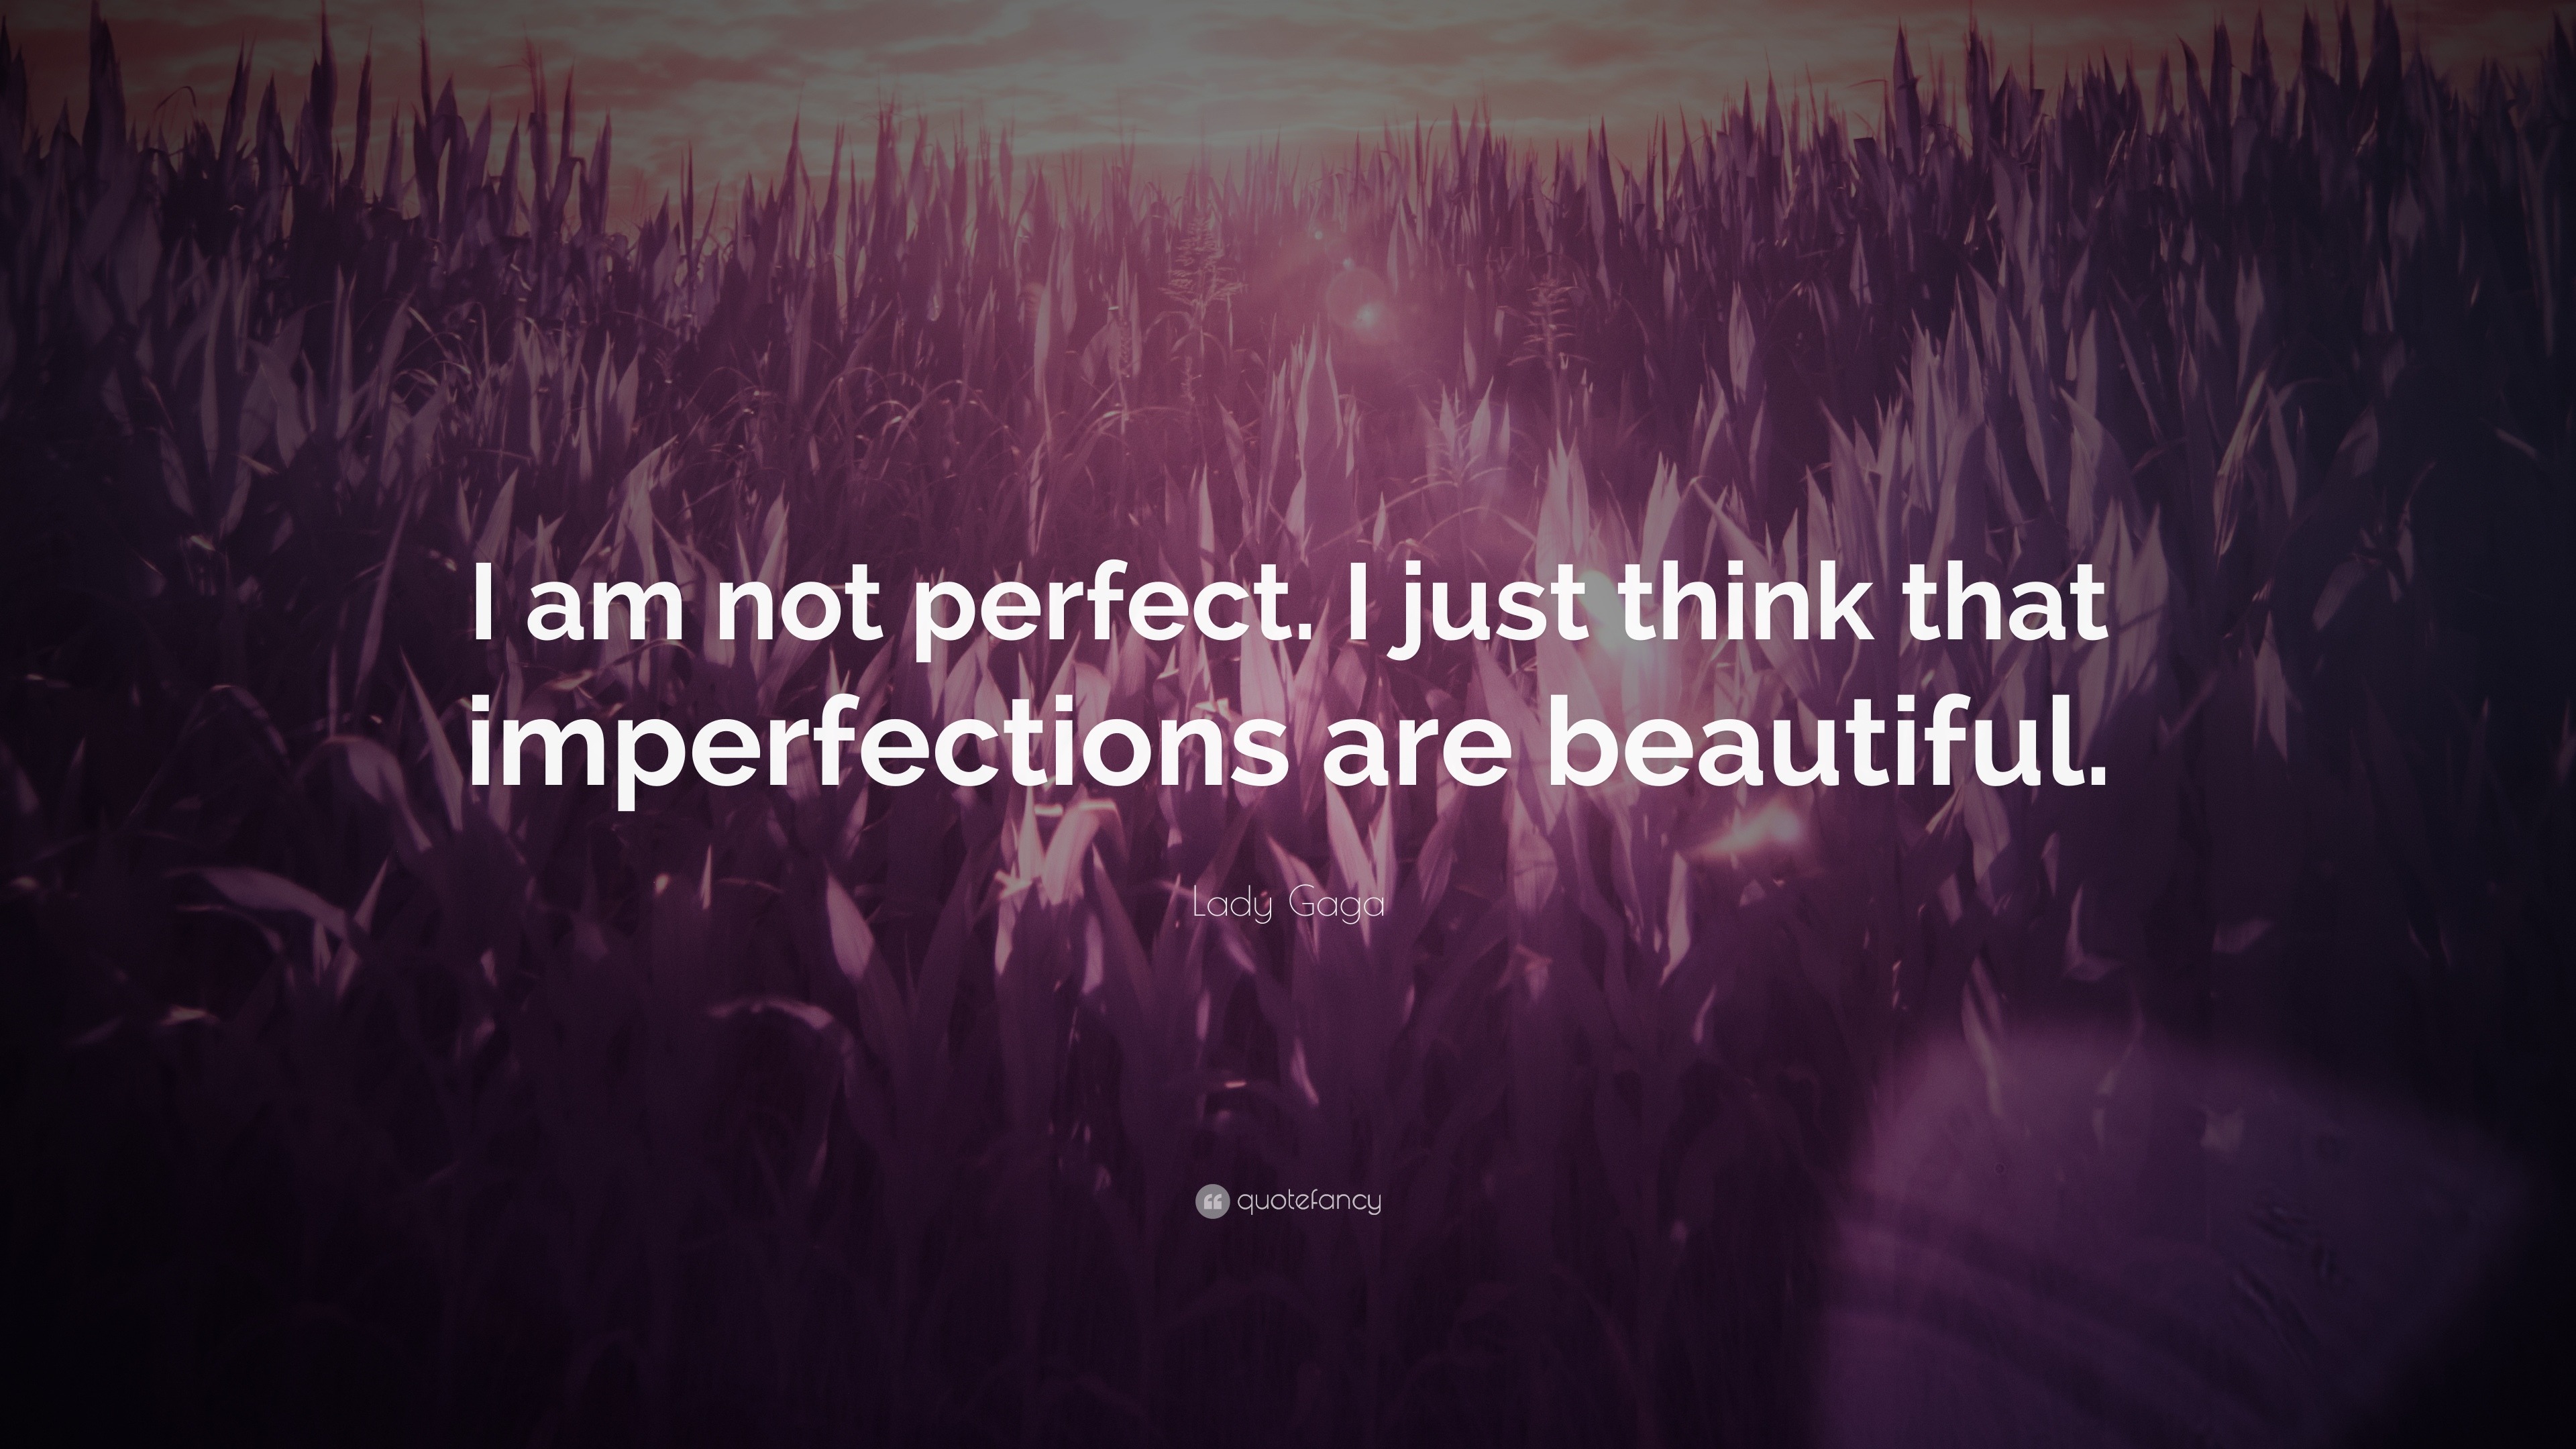 Lady Gaga Quote I Am Not Perfect I Just Think That Imperfections Are Beautiful